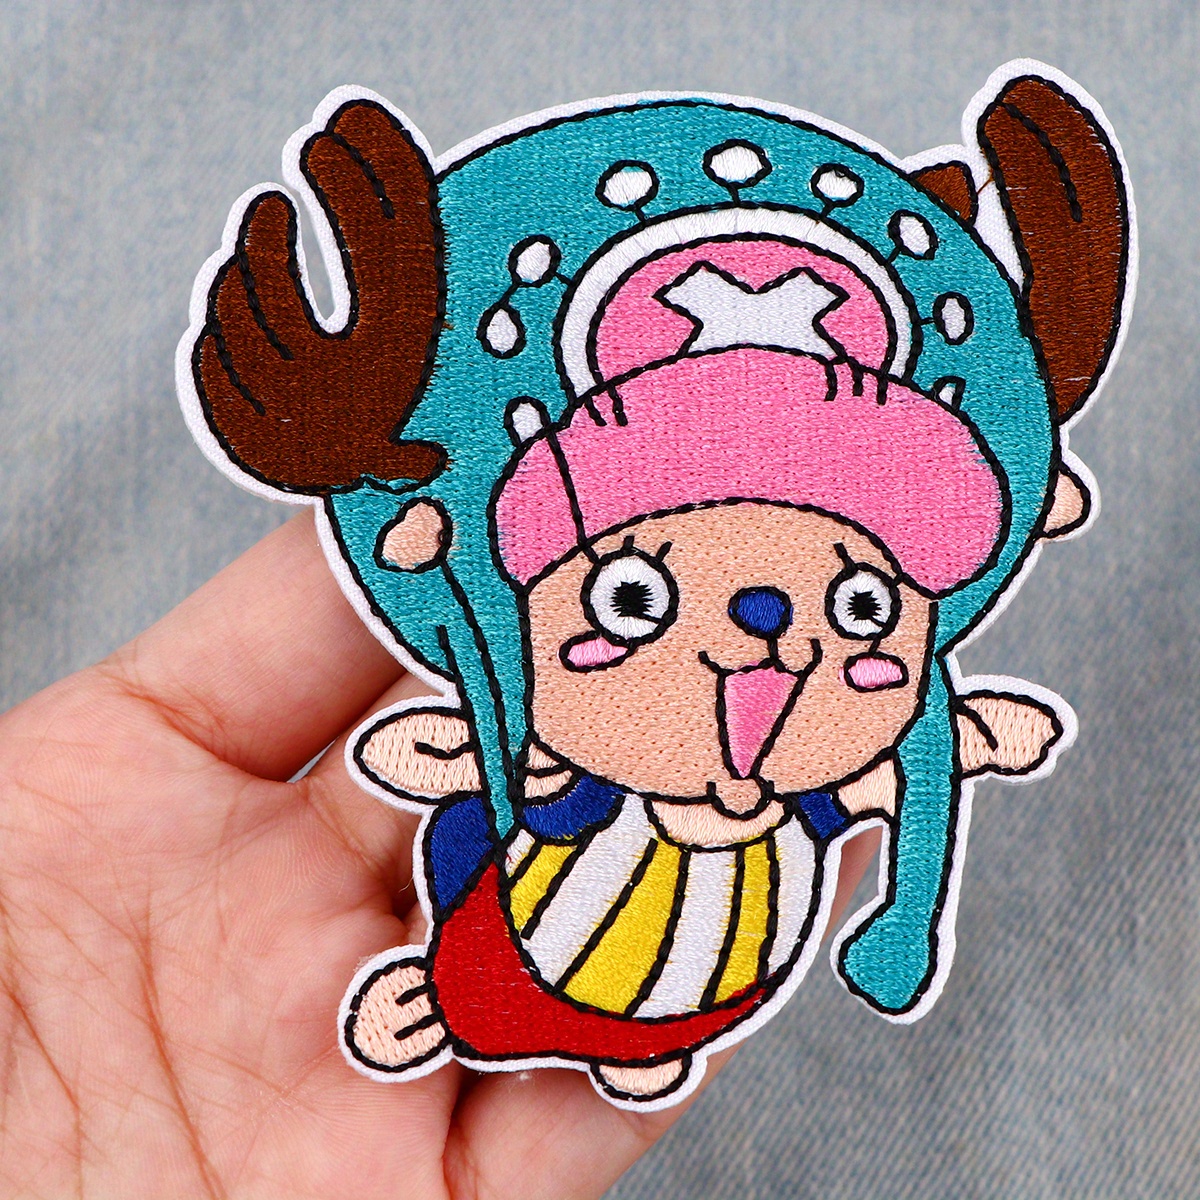 1pc Cartoon Embroidery Patch Iron On Patches For Clothing Anime Patches On  Clothes Animal Sew Ironing Sticker